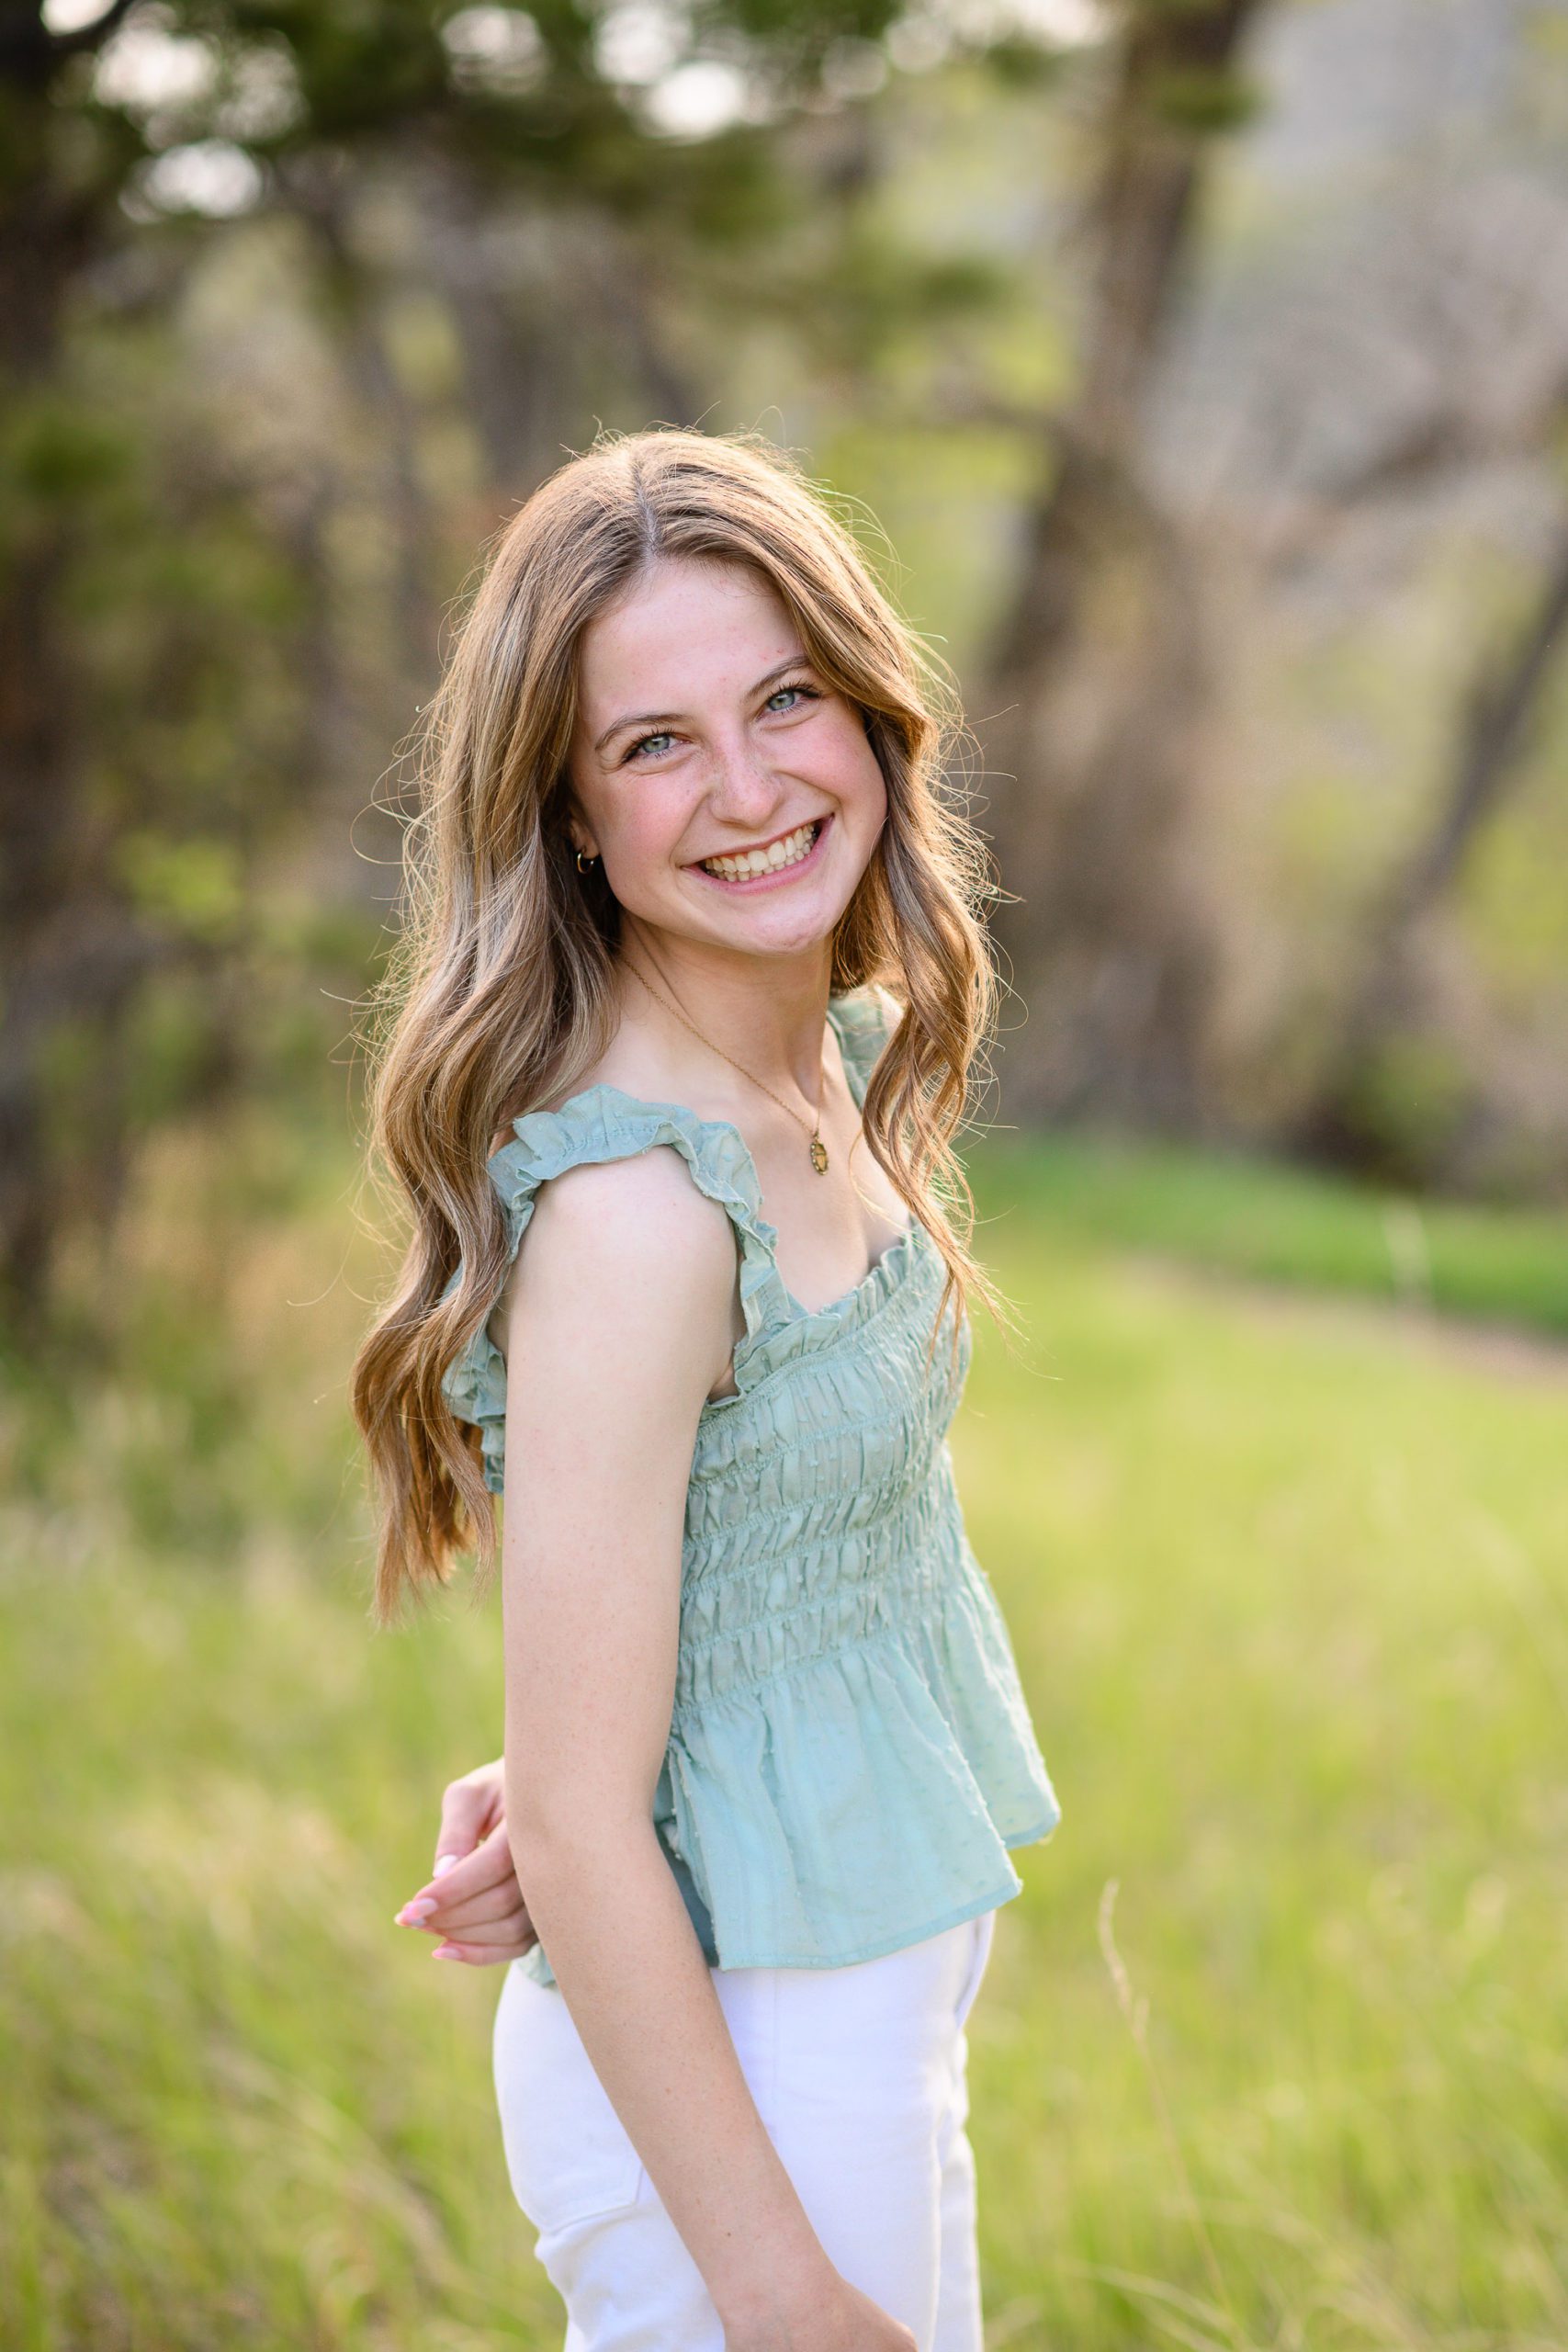 Senior girl in sunkissed light wearing a green frilled tank top looking over her shoulder at a Denver Senior Photographer.